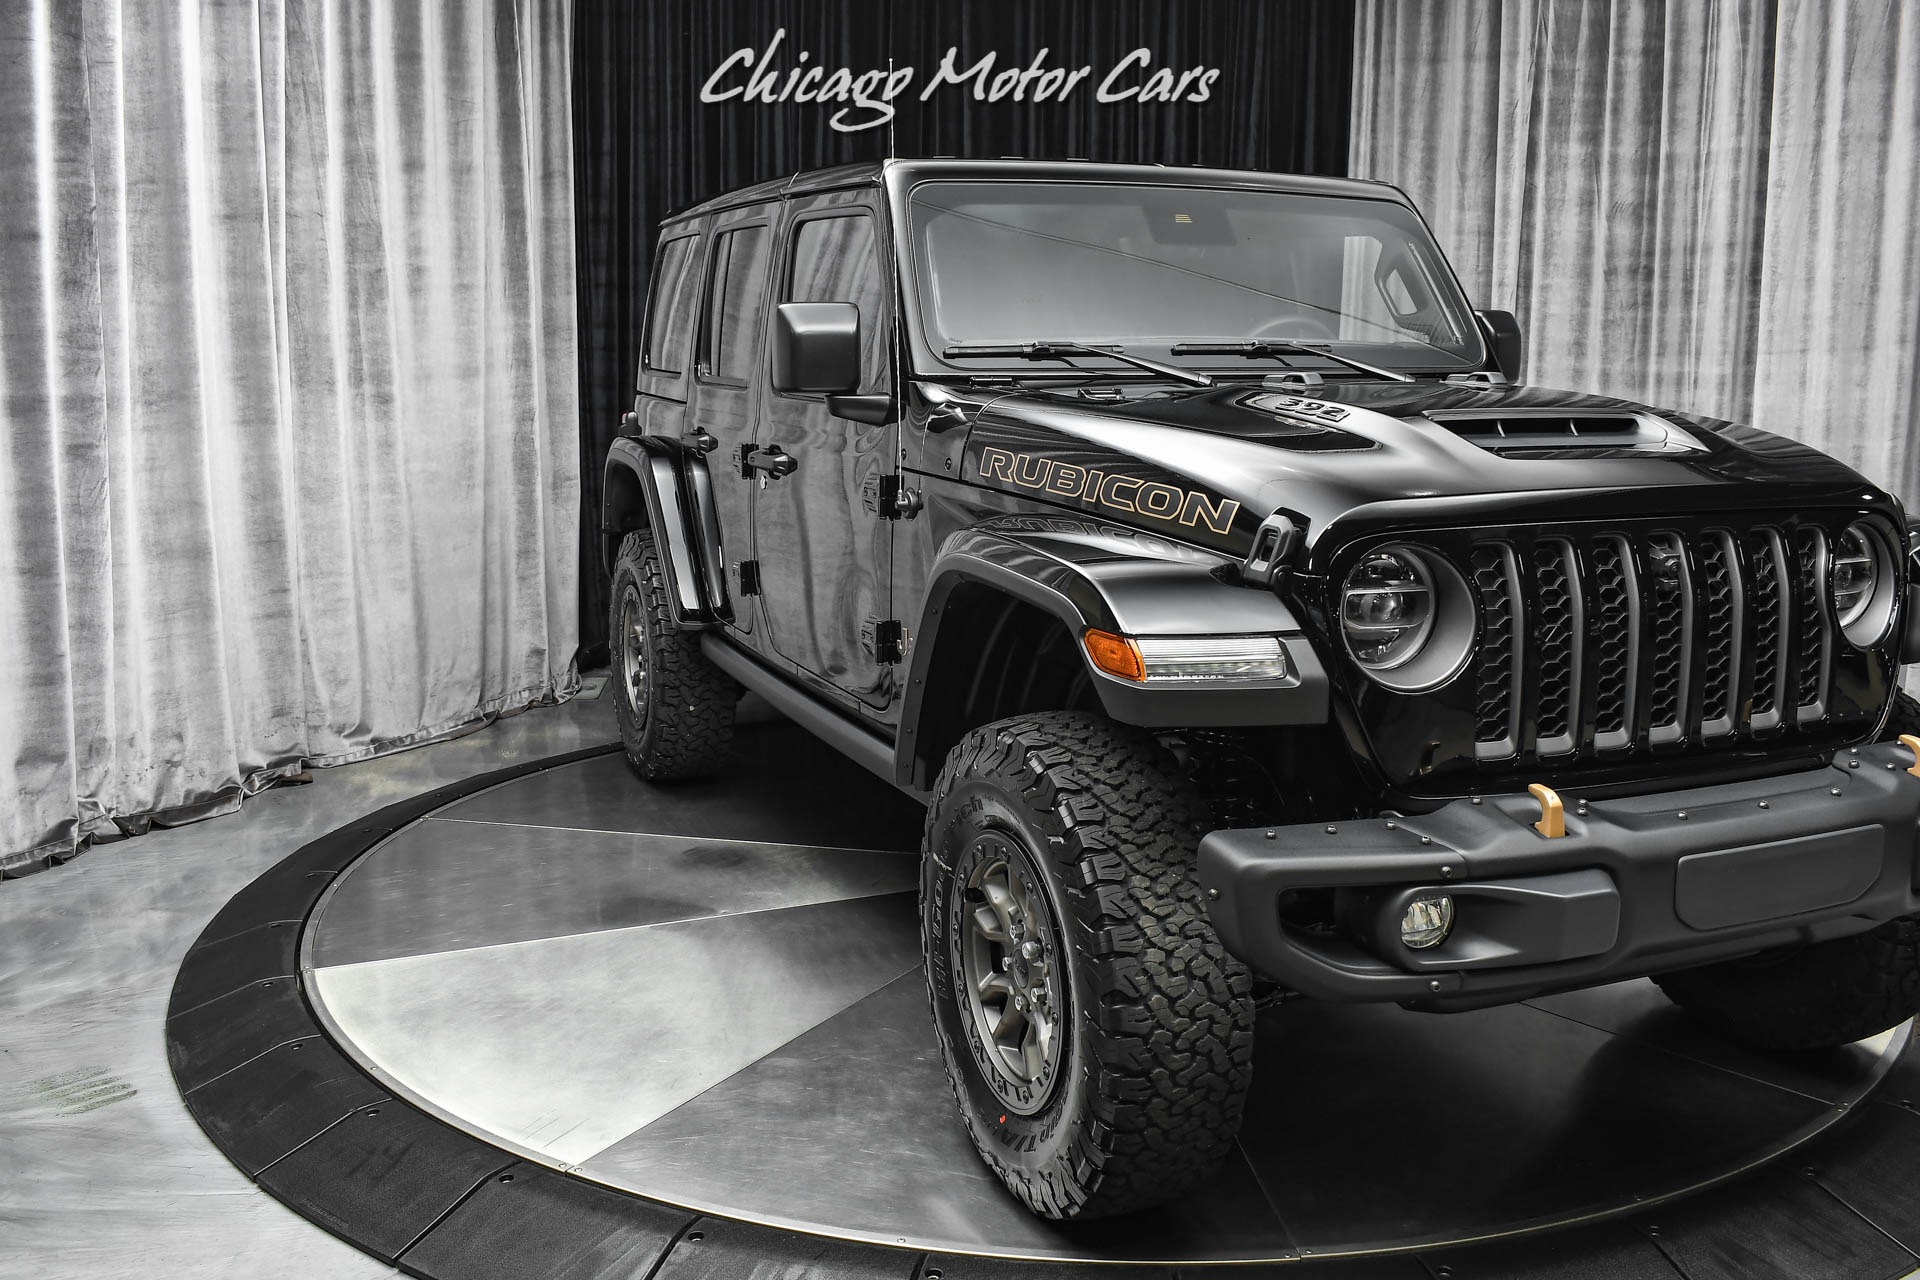 Used-2022-Jeep-Wrangler-Unlimited-Rubicon-392-SUV-Now-Discontinued-Production-Like-New-64L-HEMI-V8-Loaded